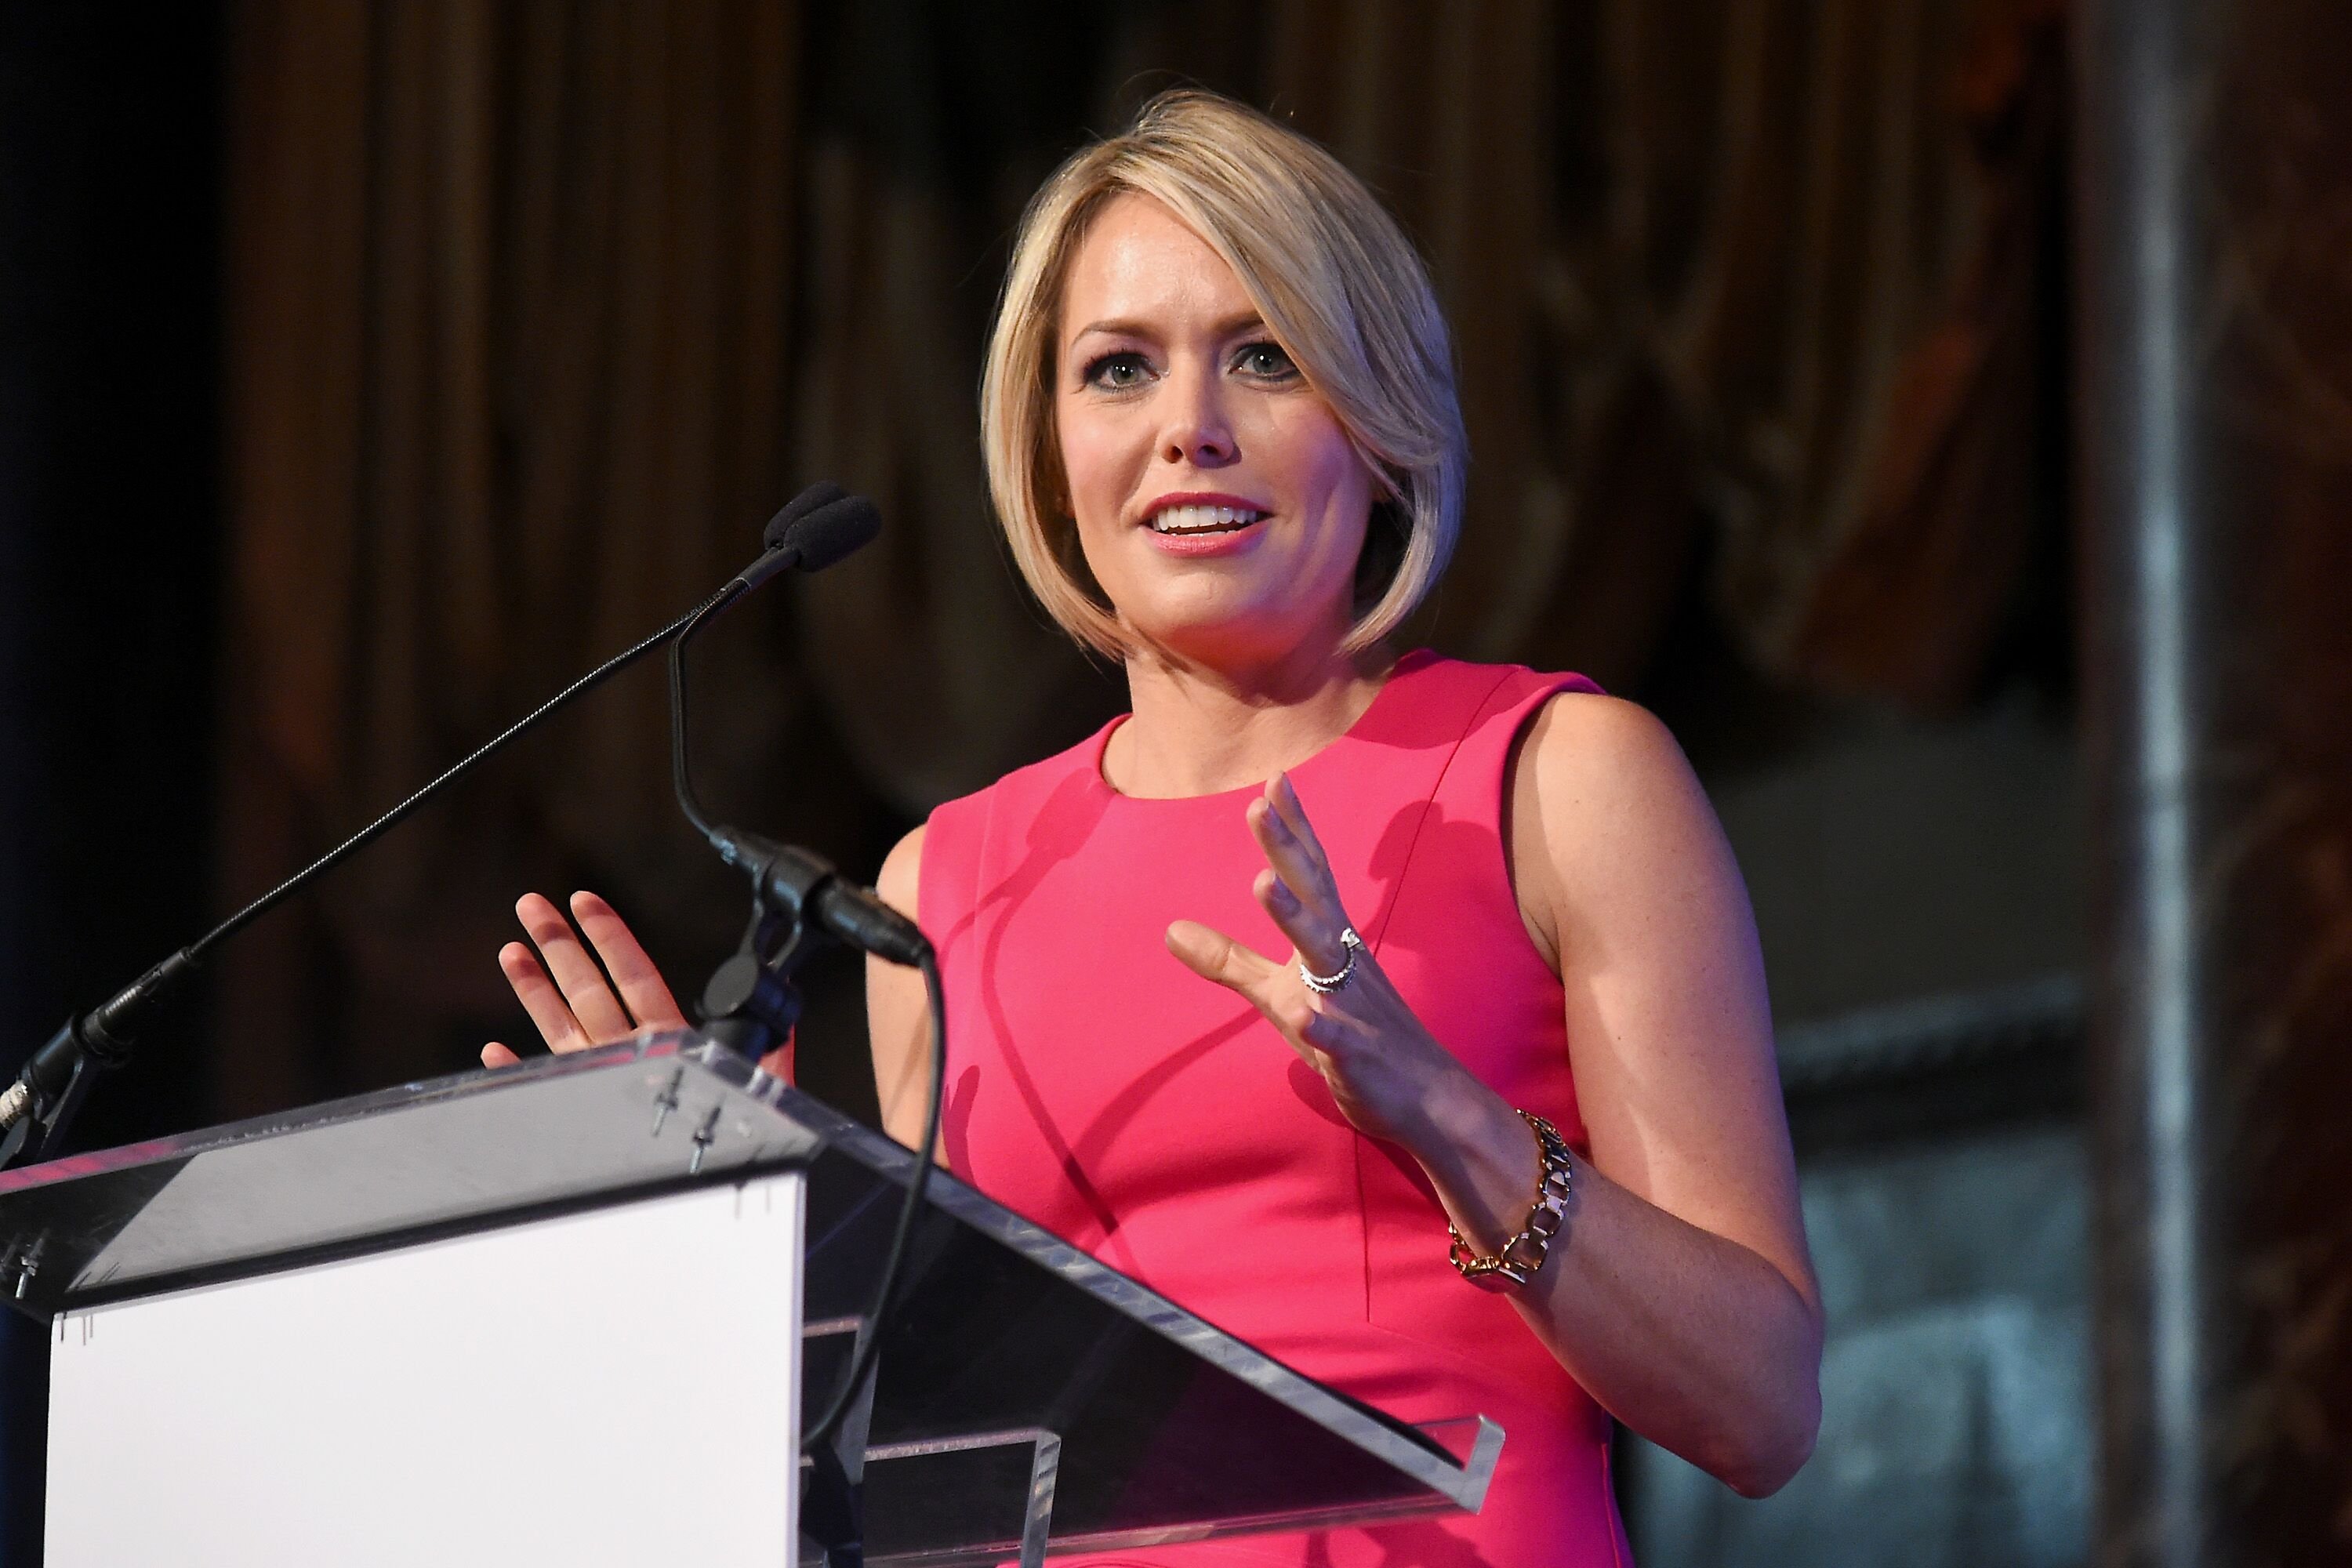 Dylan Dreyer attends the 42nd Annual Gracie Awards. | Photo: Getty Images